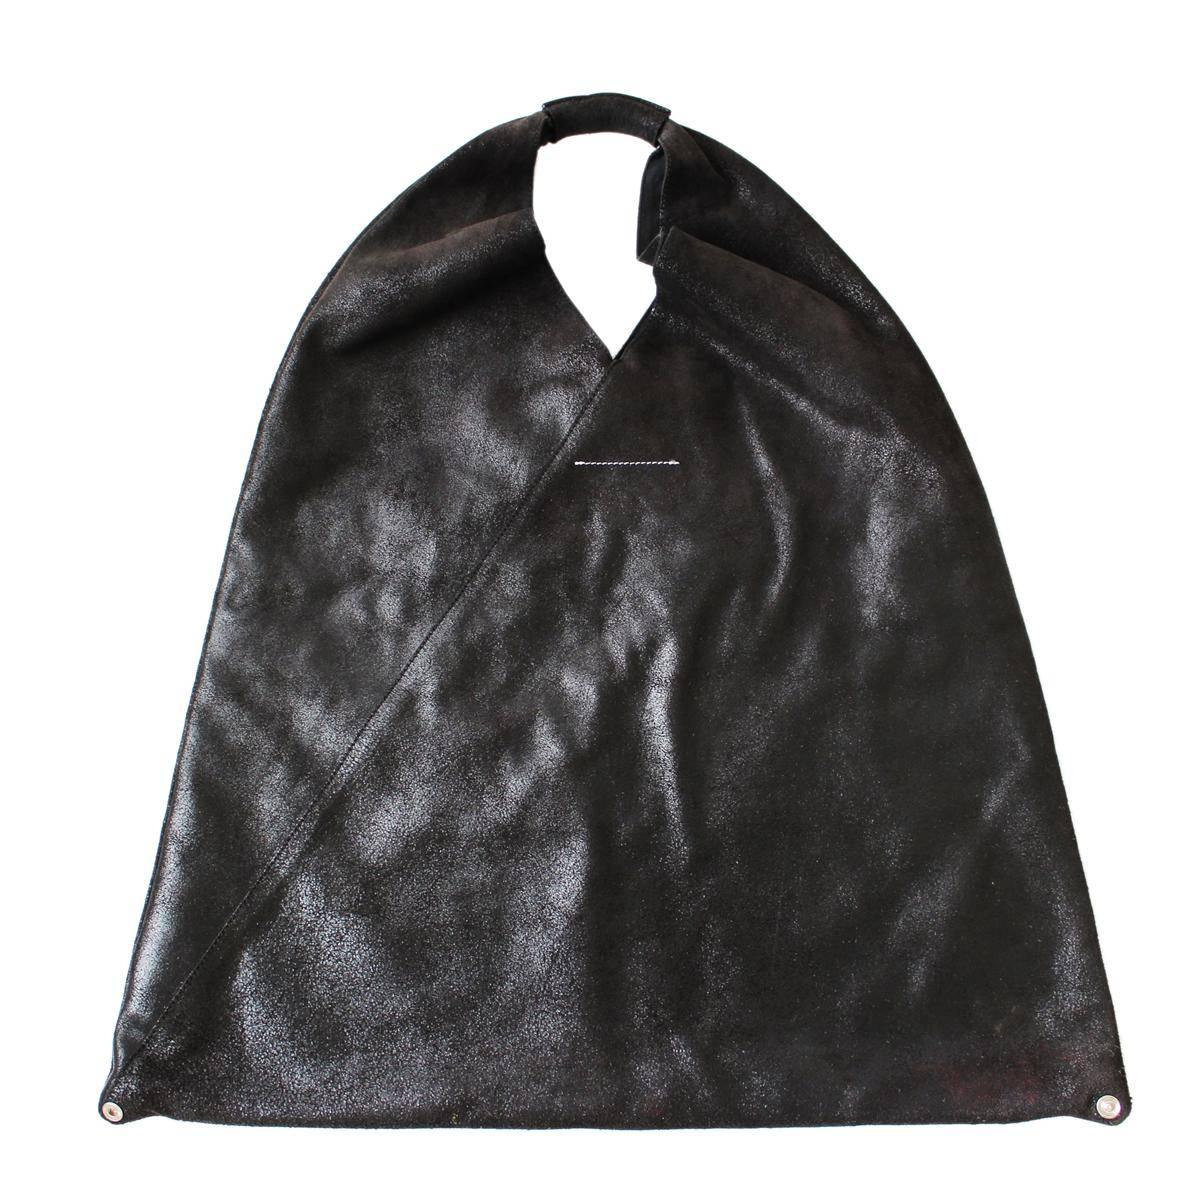 Fantastic and chic Maison Margiela tote bag
Large tote bag
Calf leather
Black color
Single handle
Button closure
Additional external pocket for half closure
Internal pocket
Cm 57 x 62 (22.4 x 24.4 inches)
Made in Italy
Worldwide express shipping